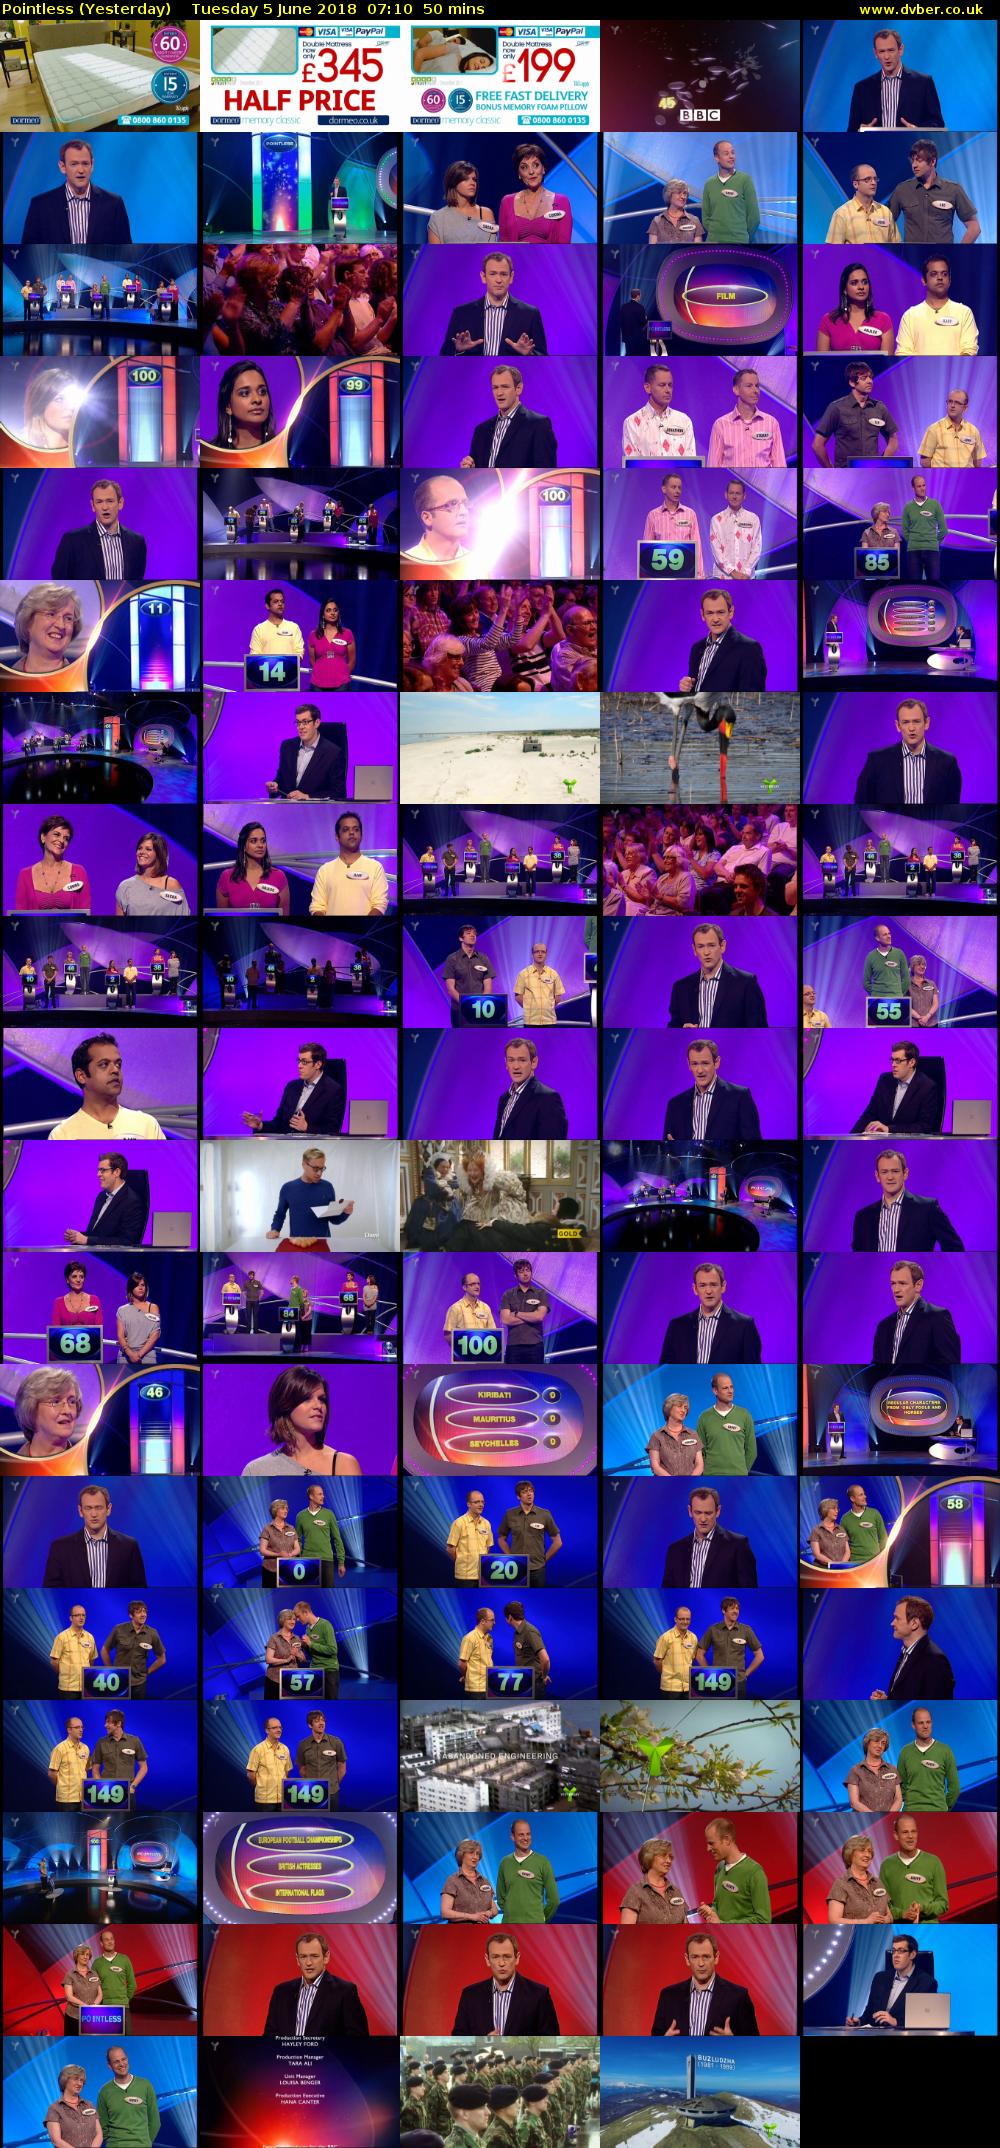 Pointless (Yesterday) Tuesday 5 June 2018 07:10 - 08:00